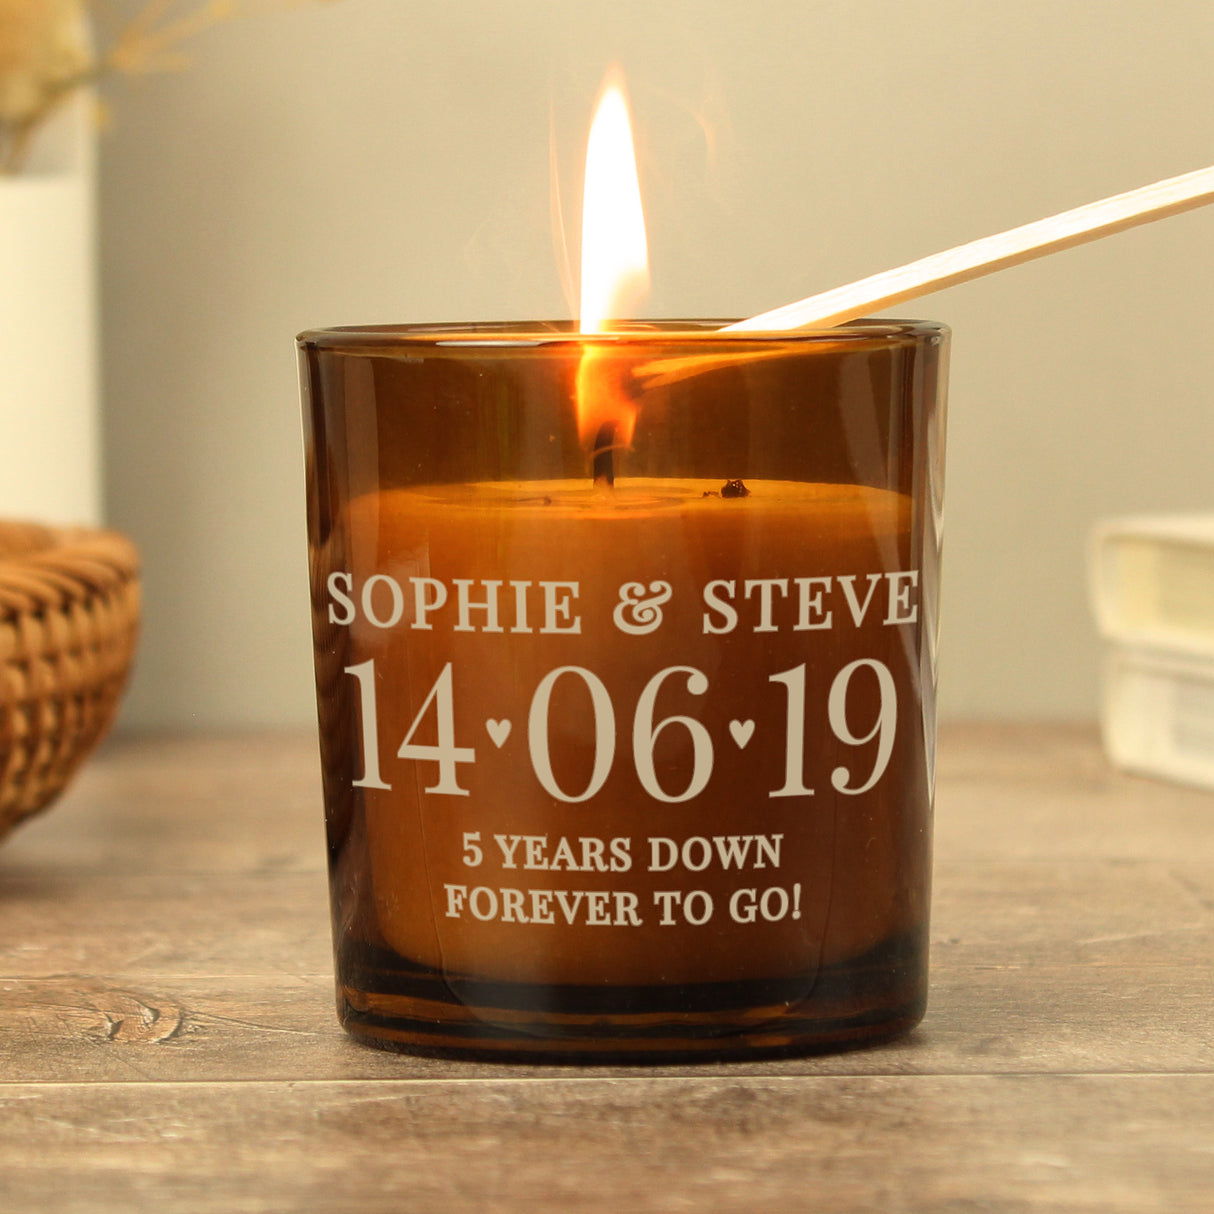 Personalised Special Date Amber Glass Candle